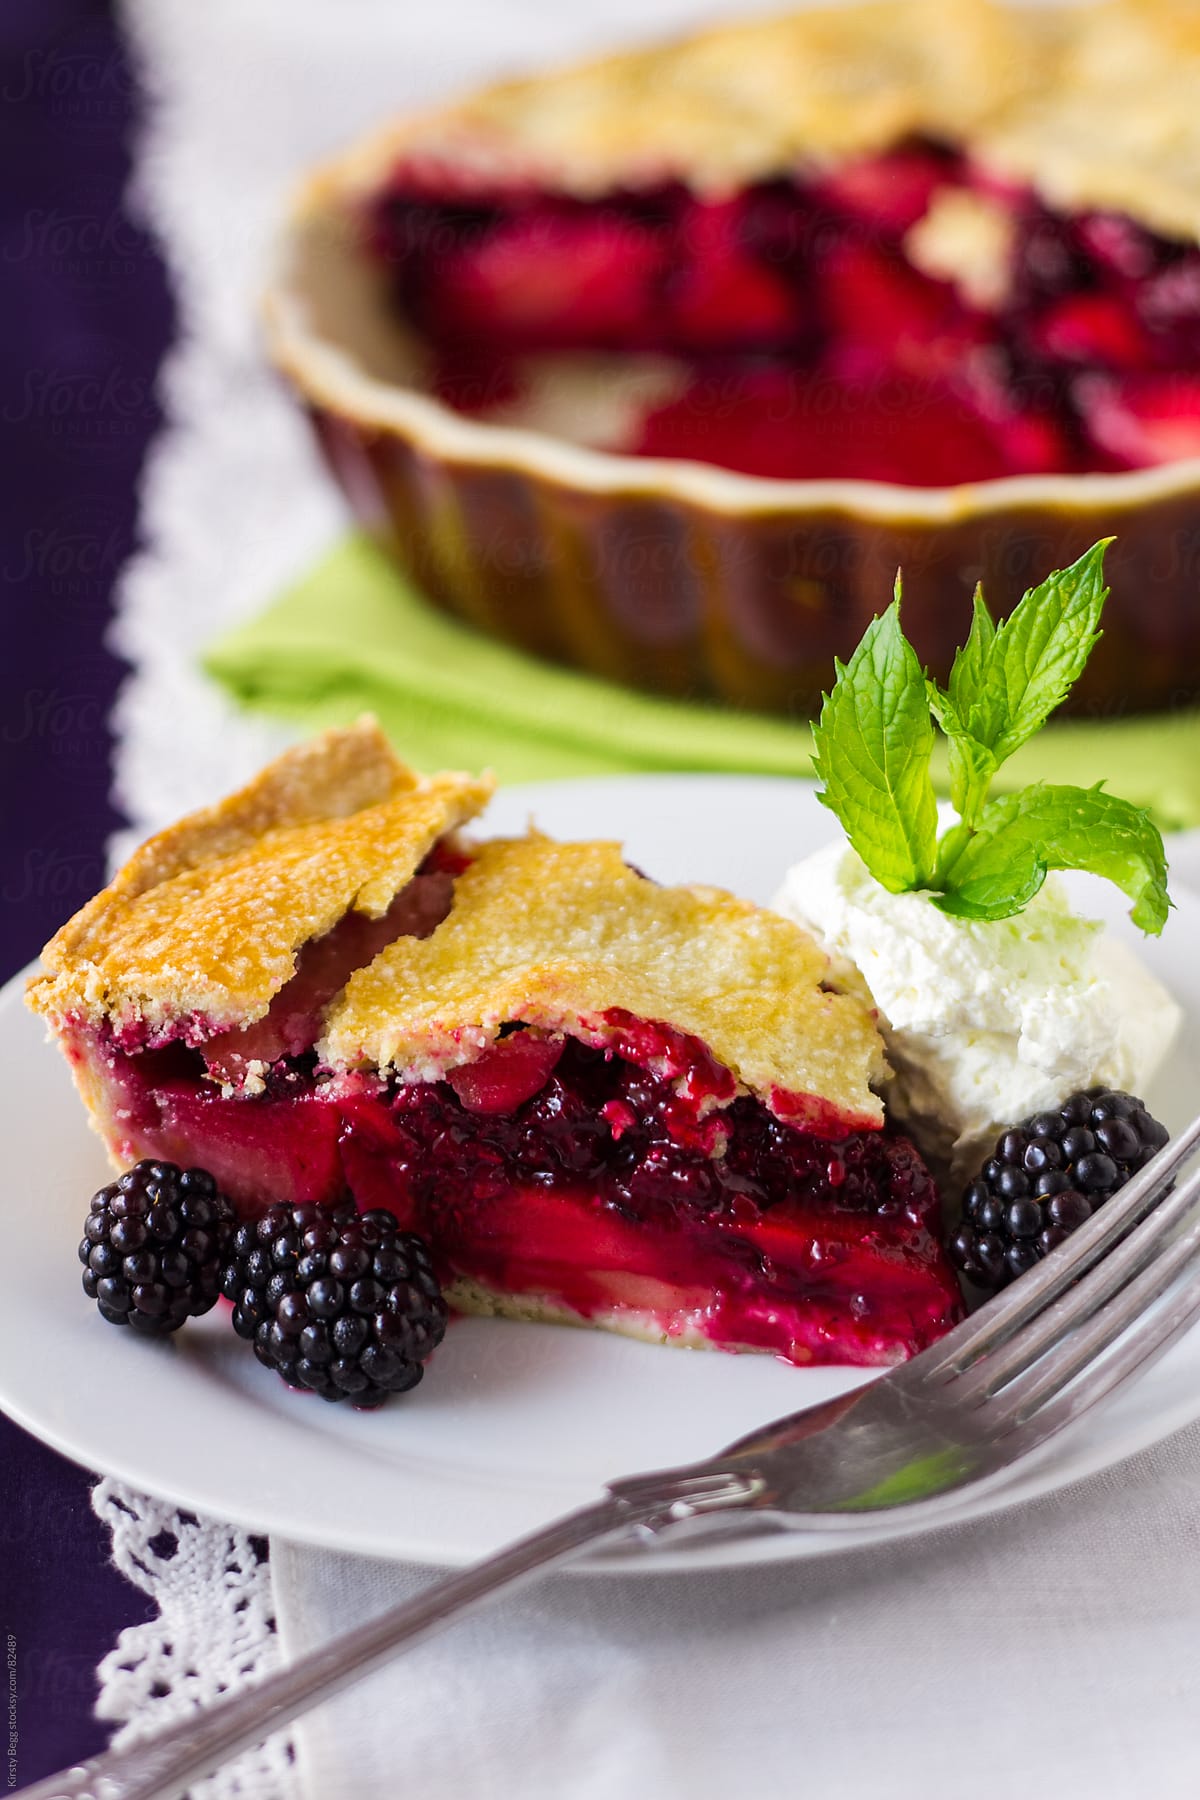 Apple and Blackberry Pie on plate